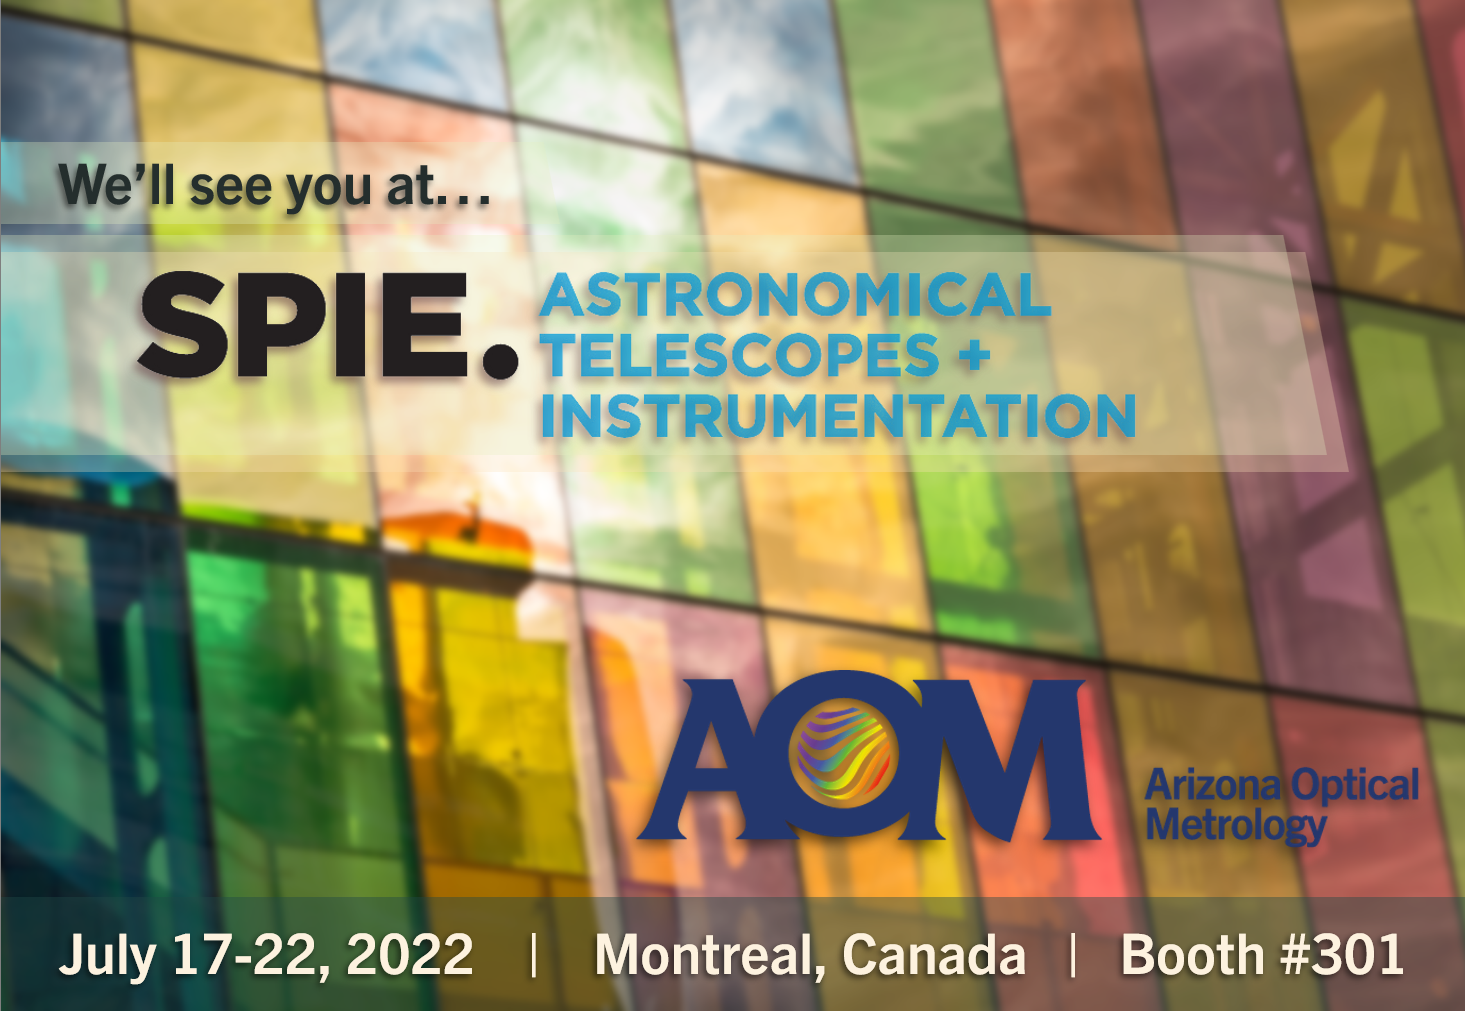 AOM will be at SPIE Astronomical Telescopes + Instrumentation!